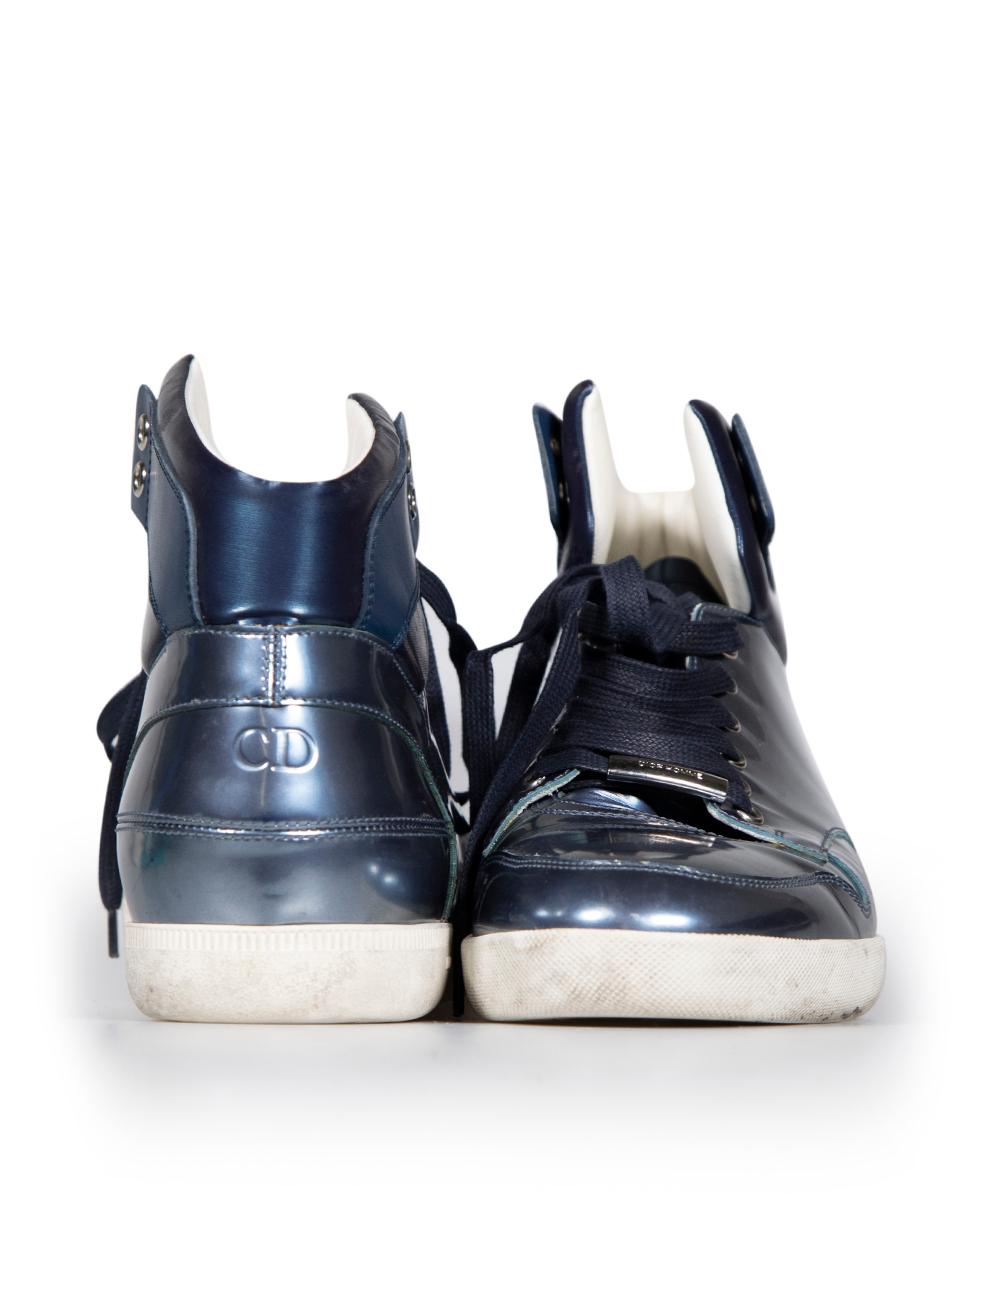 Dior Dior Homme Blue Patent Hi-Top Trainers Size IT 42 In Good Condition For Sale In London, GB